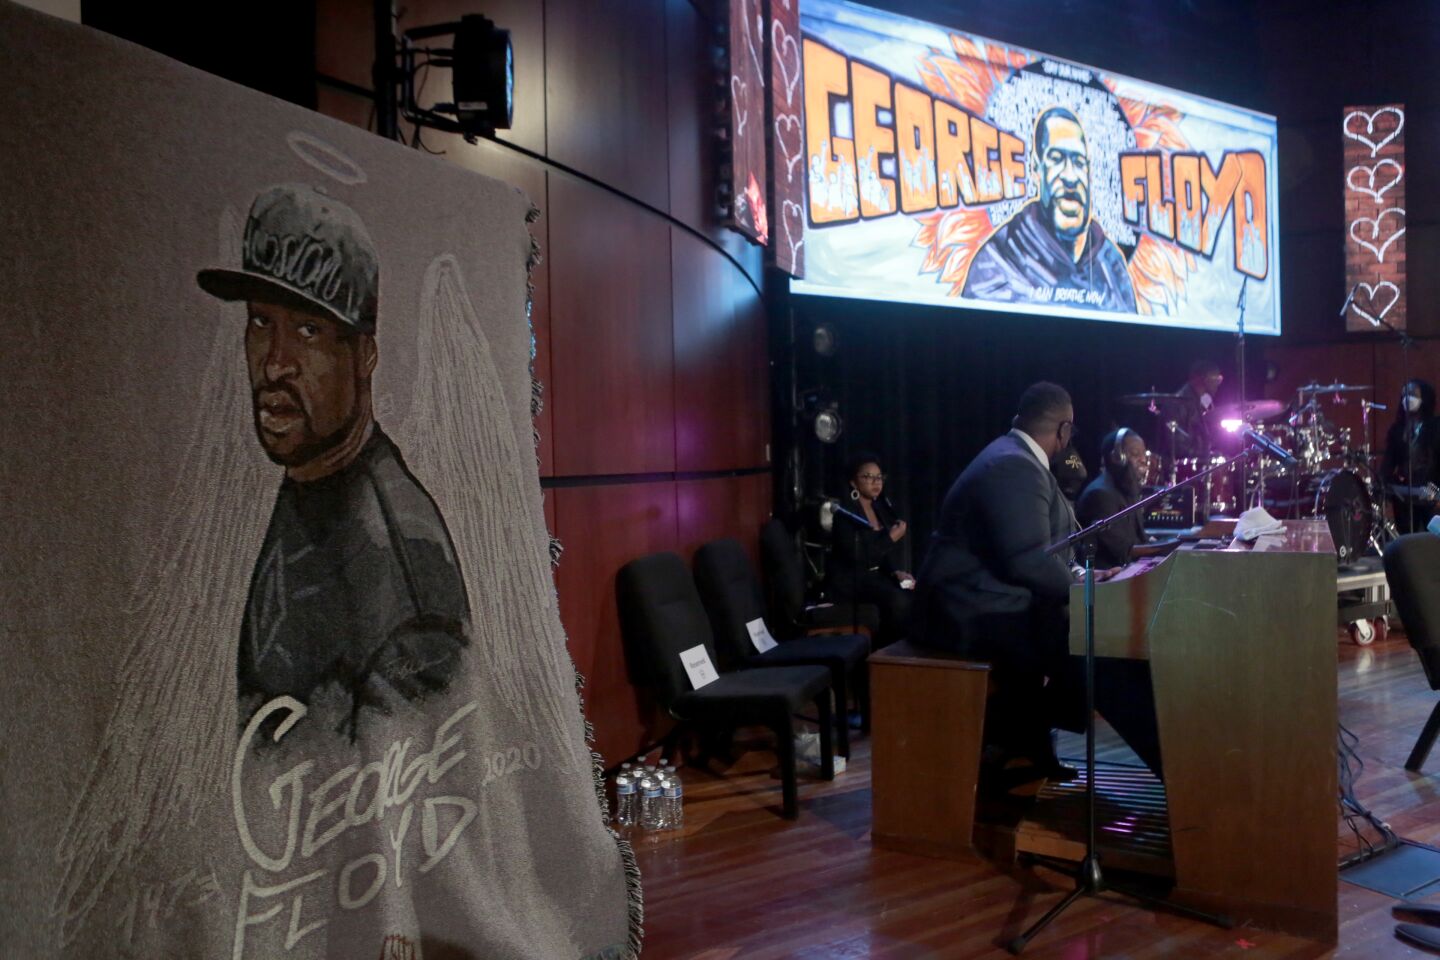 Musicians and a portrait of Floyd at Thursday's memorial.